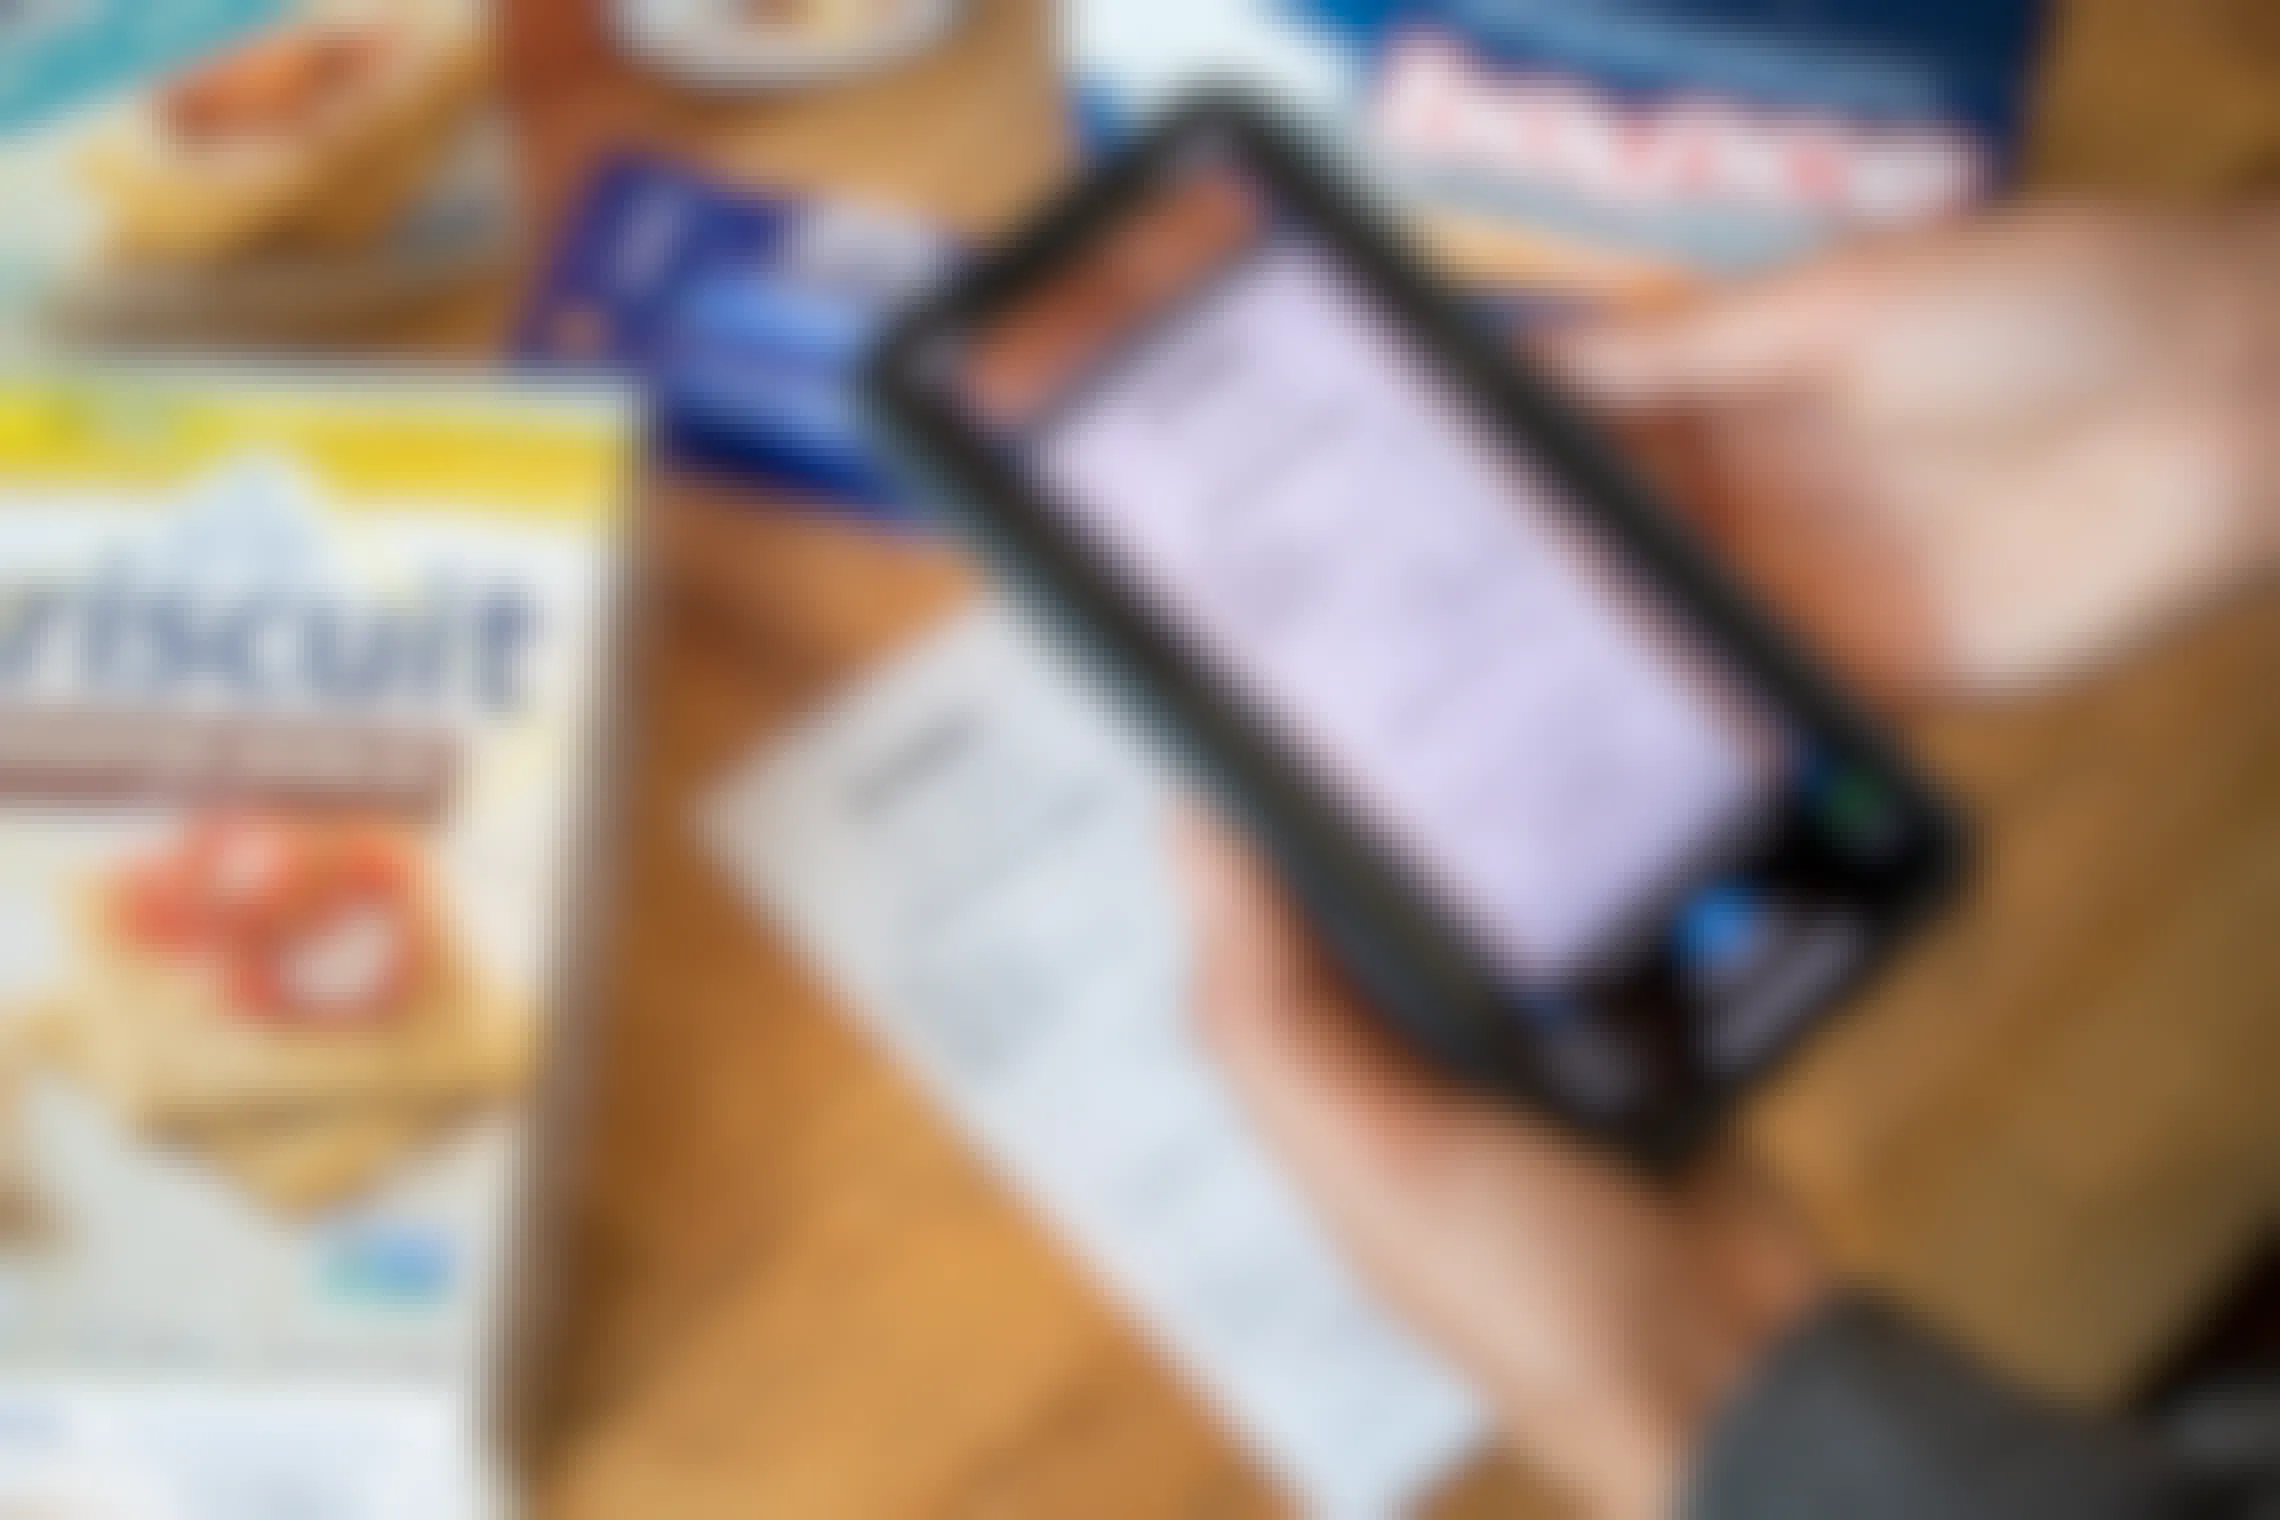 A person taking a photo of a Target receipt through the Checkout51 mobile app's scan feature. On the table next to the receipt are various grocery items including Triscuit crackers and Bounce dryer sheets.